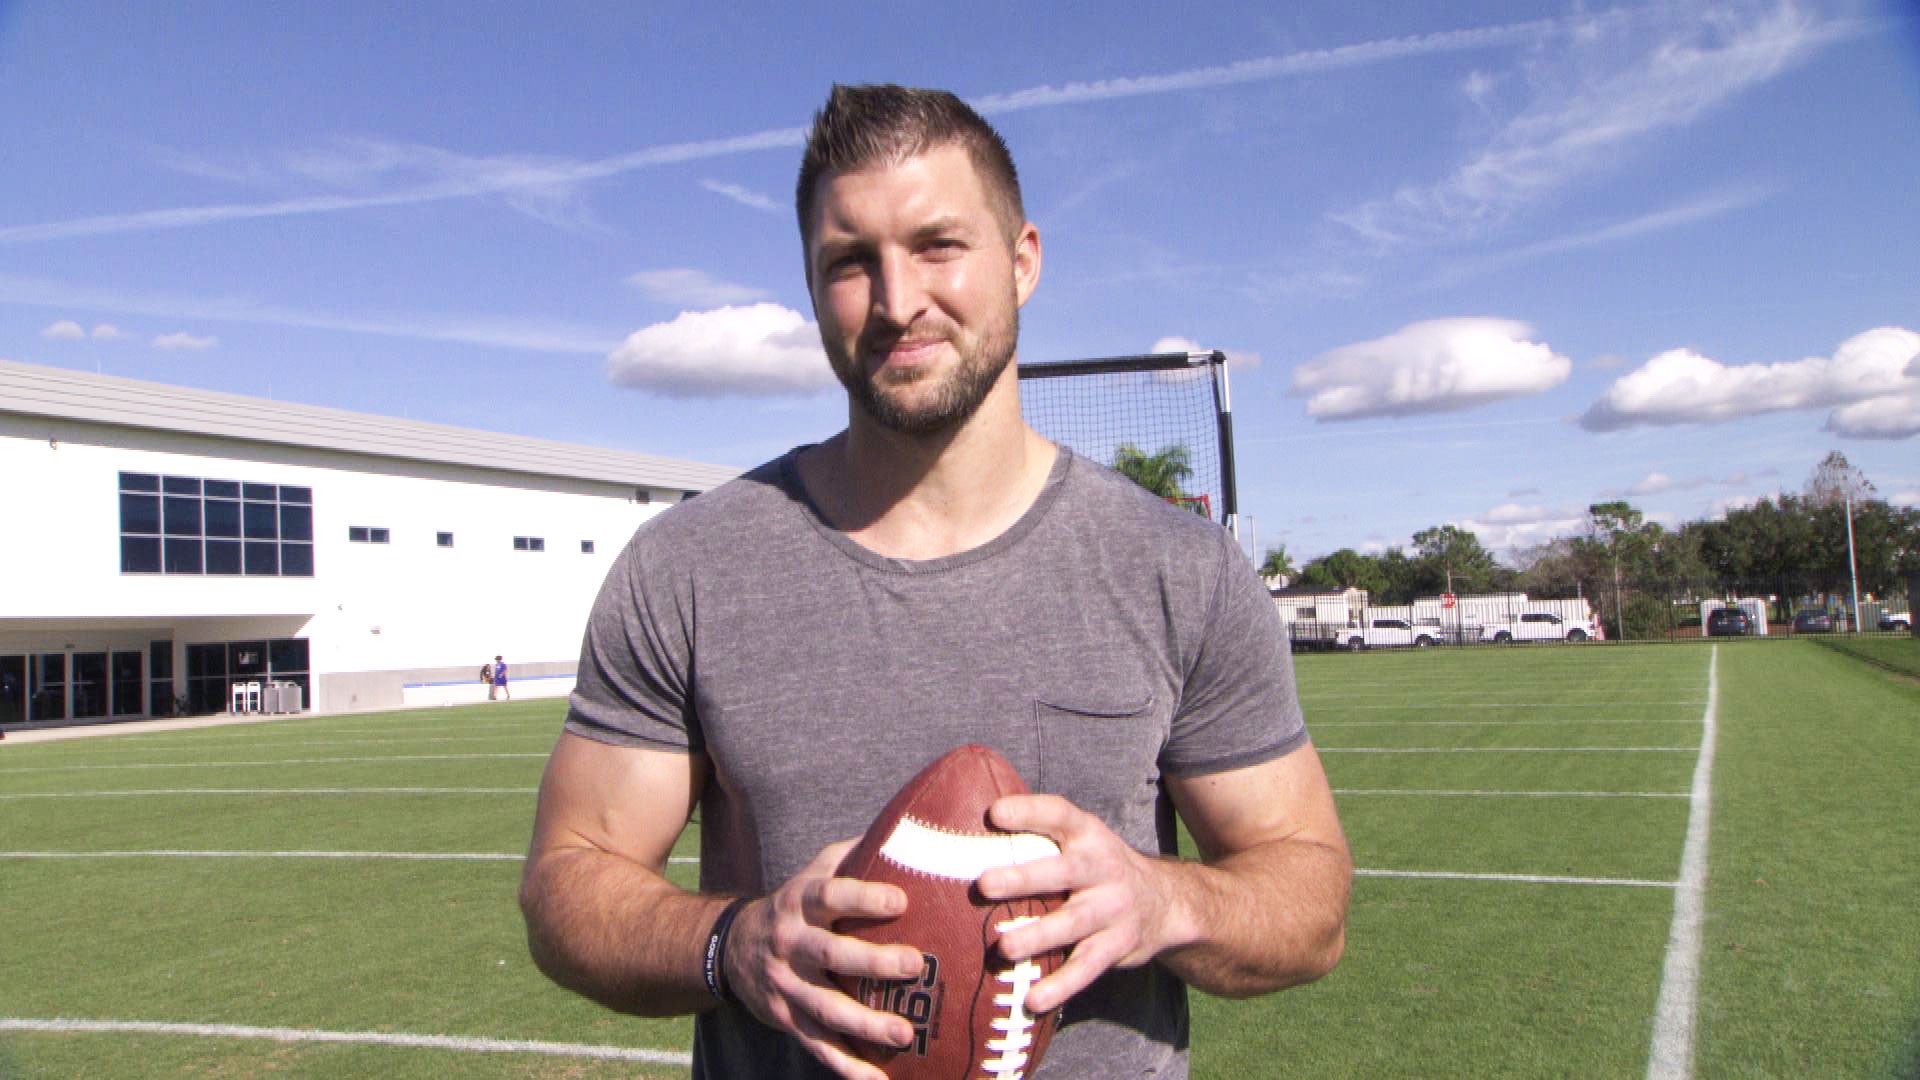 New York Mets video: Tim Tebow shares workout amid season delay